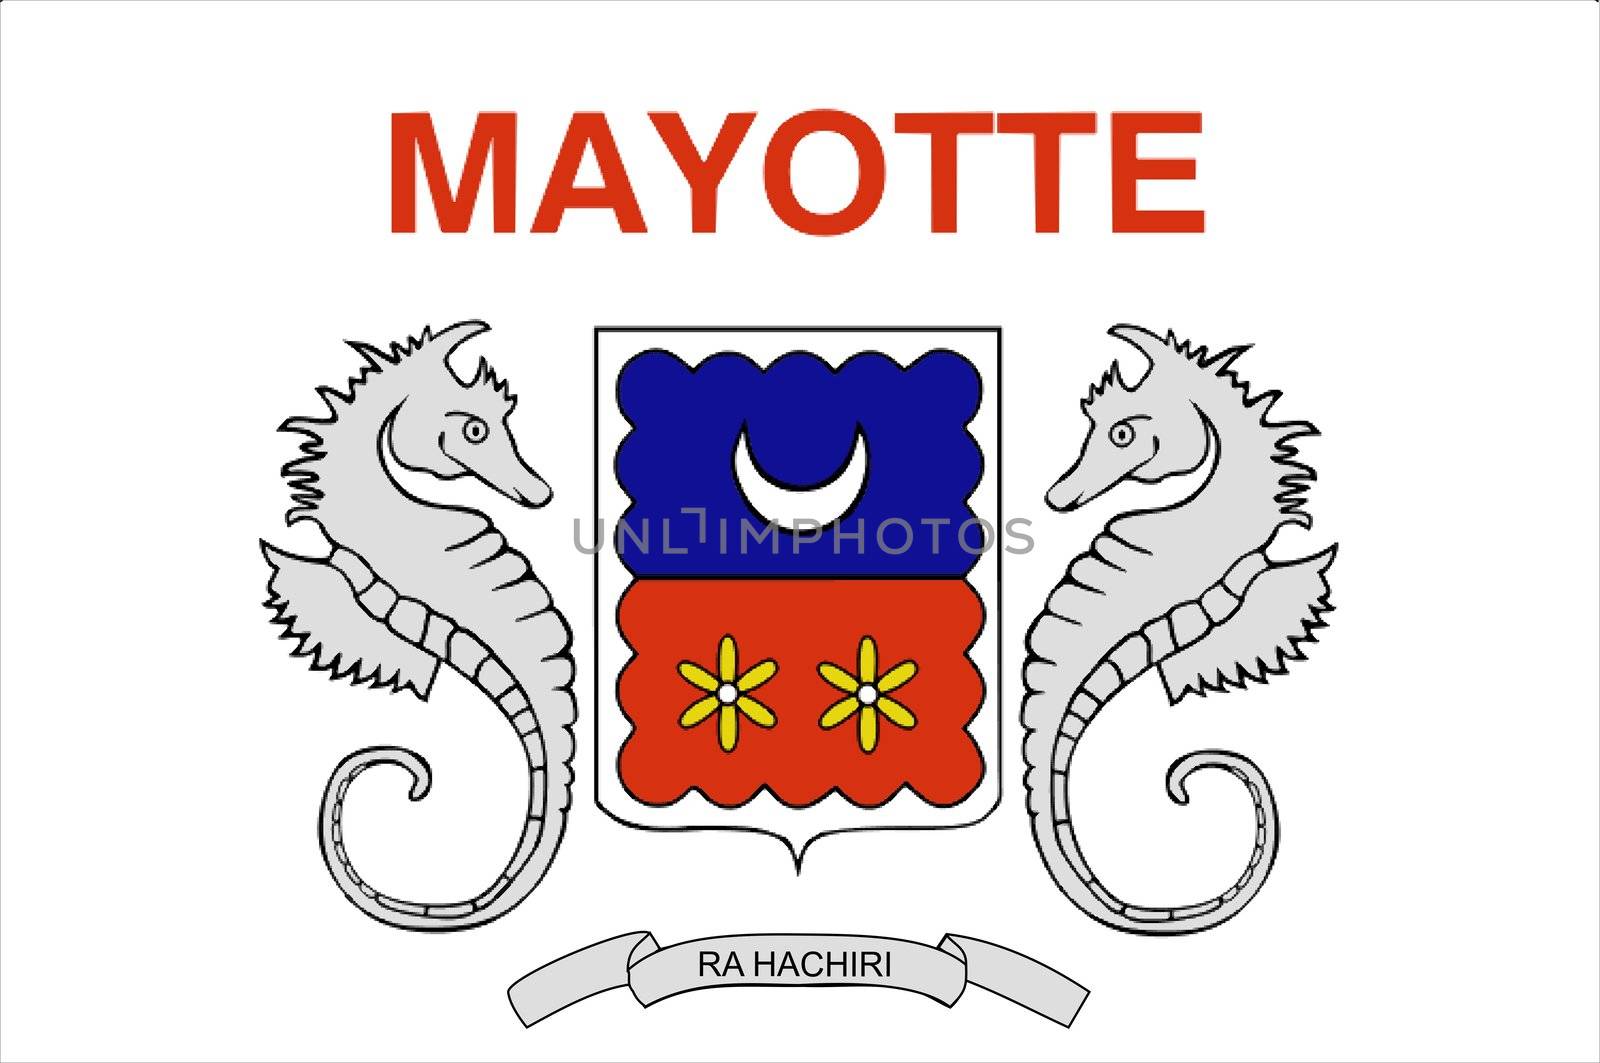 2D illustration of the flag of Mayotte